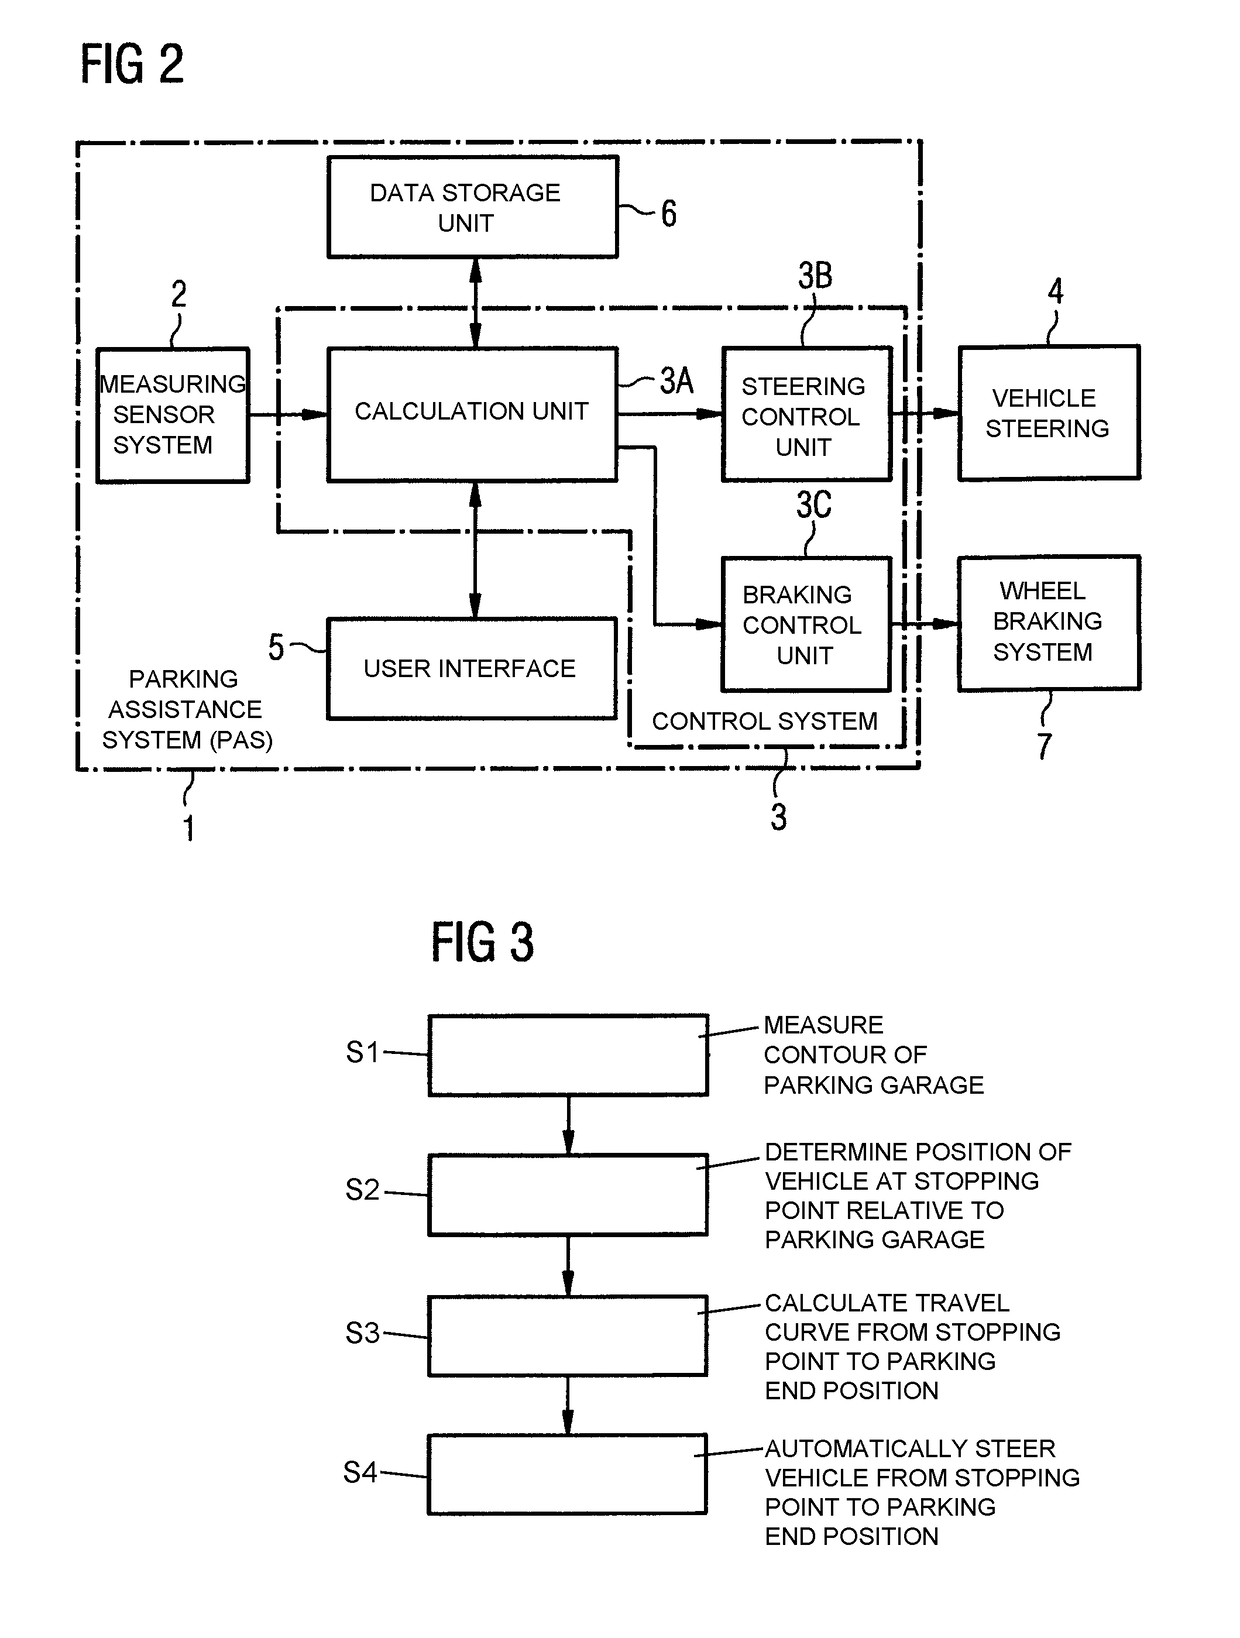 Parking assistance system and method for parking a vehicle in a parking garage